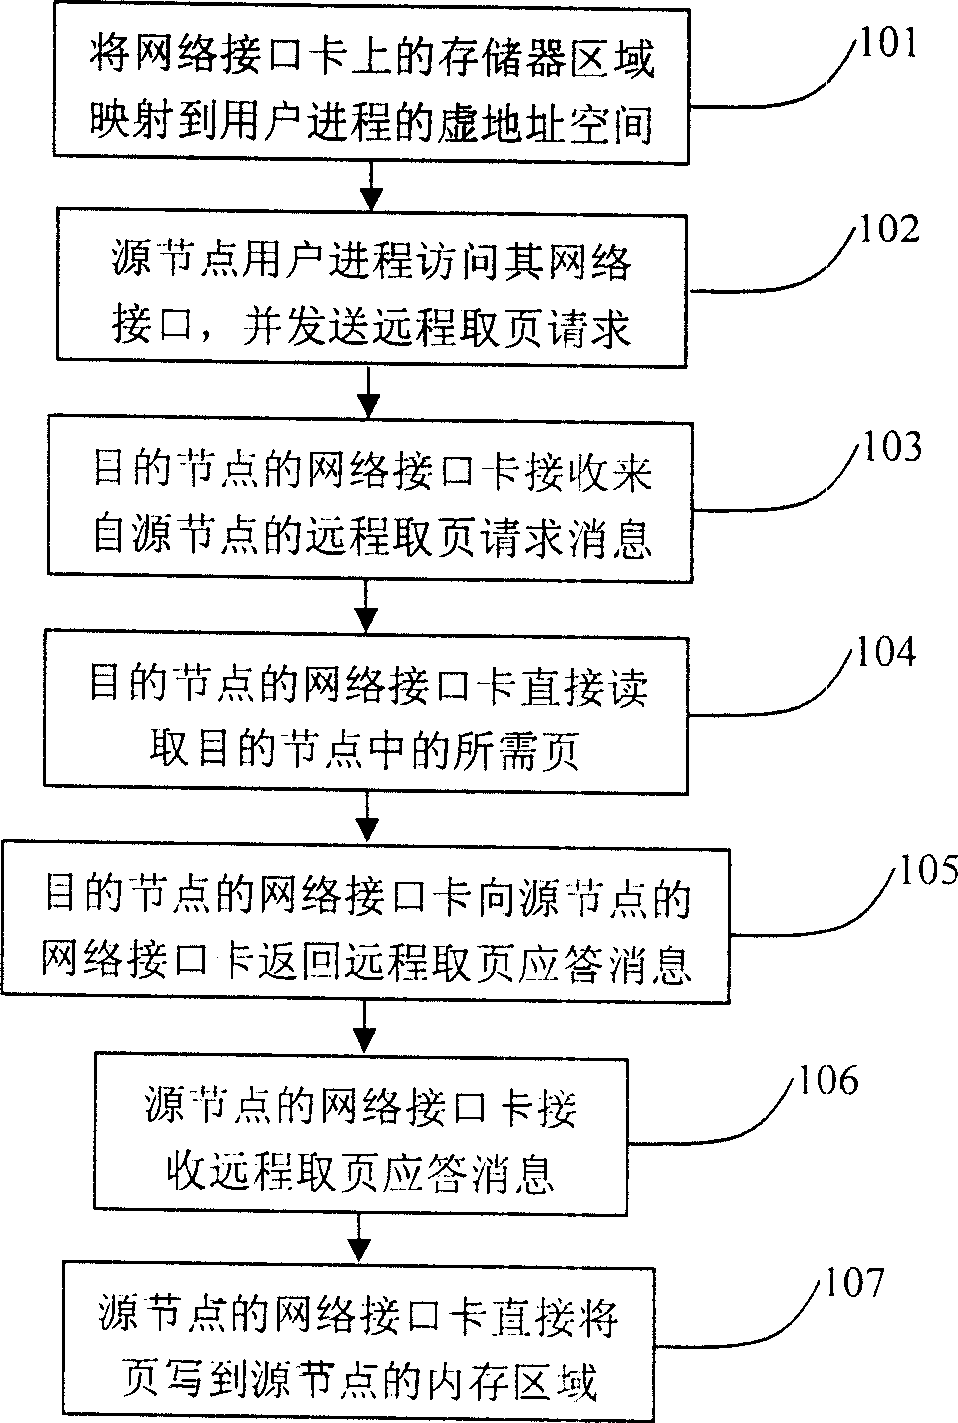 Remote page access method for use in shared virtual memory system and network interface card